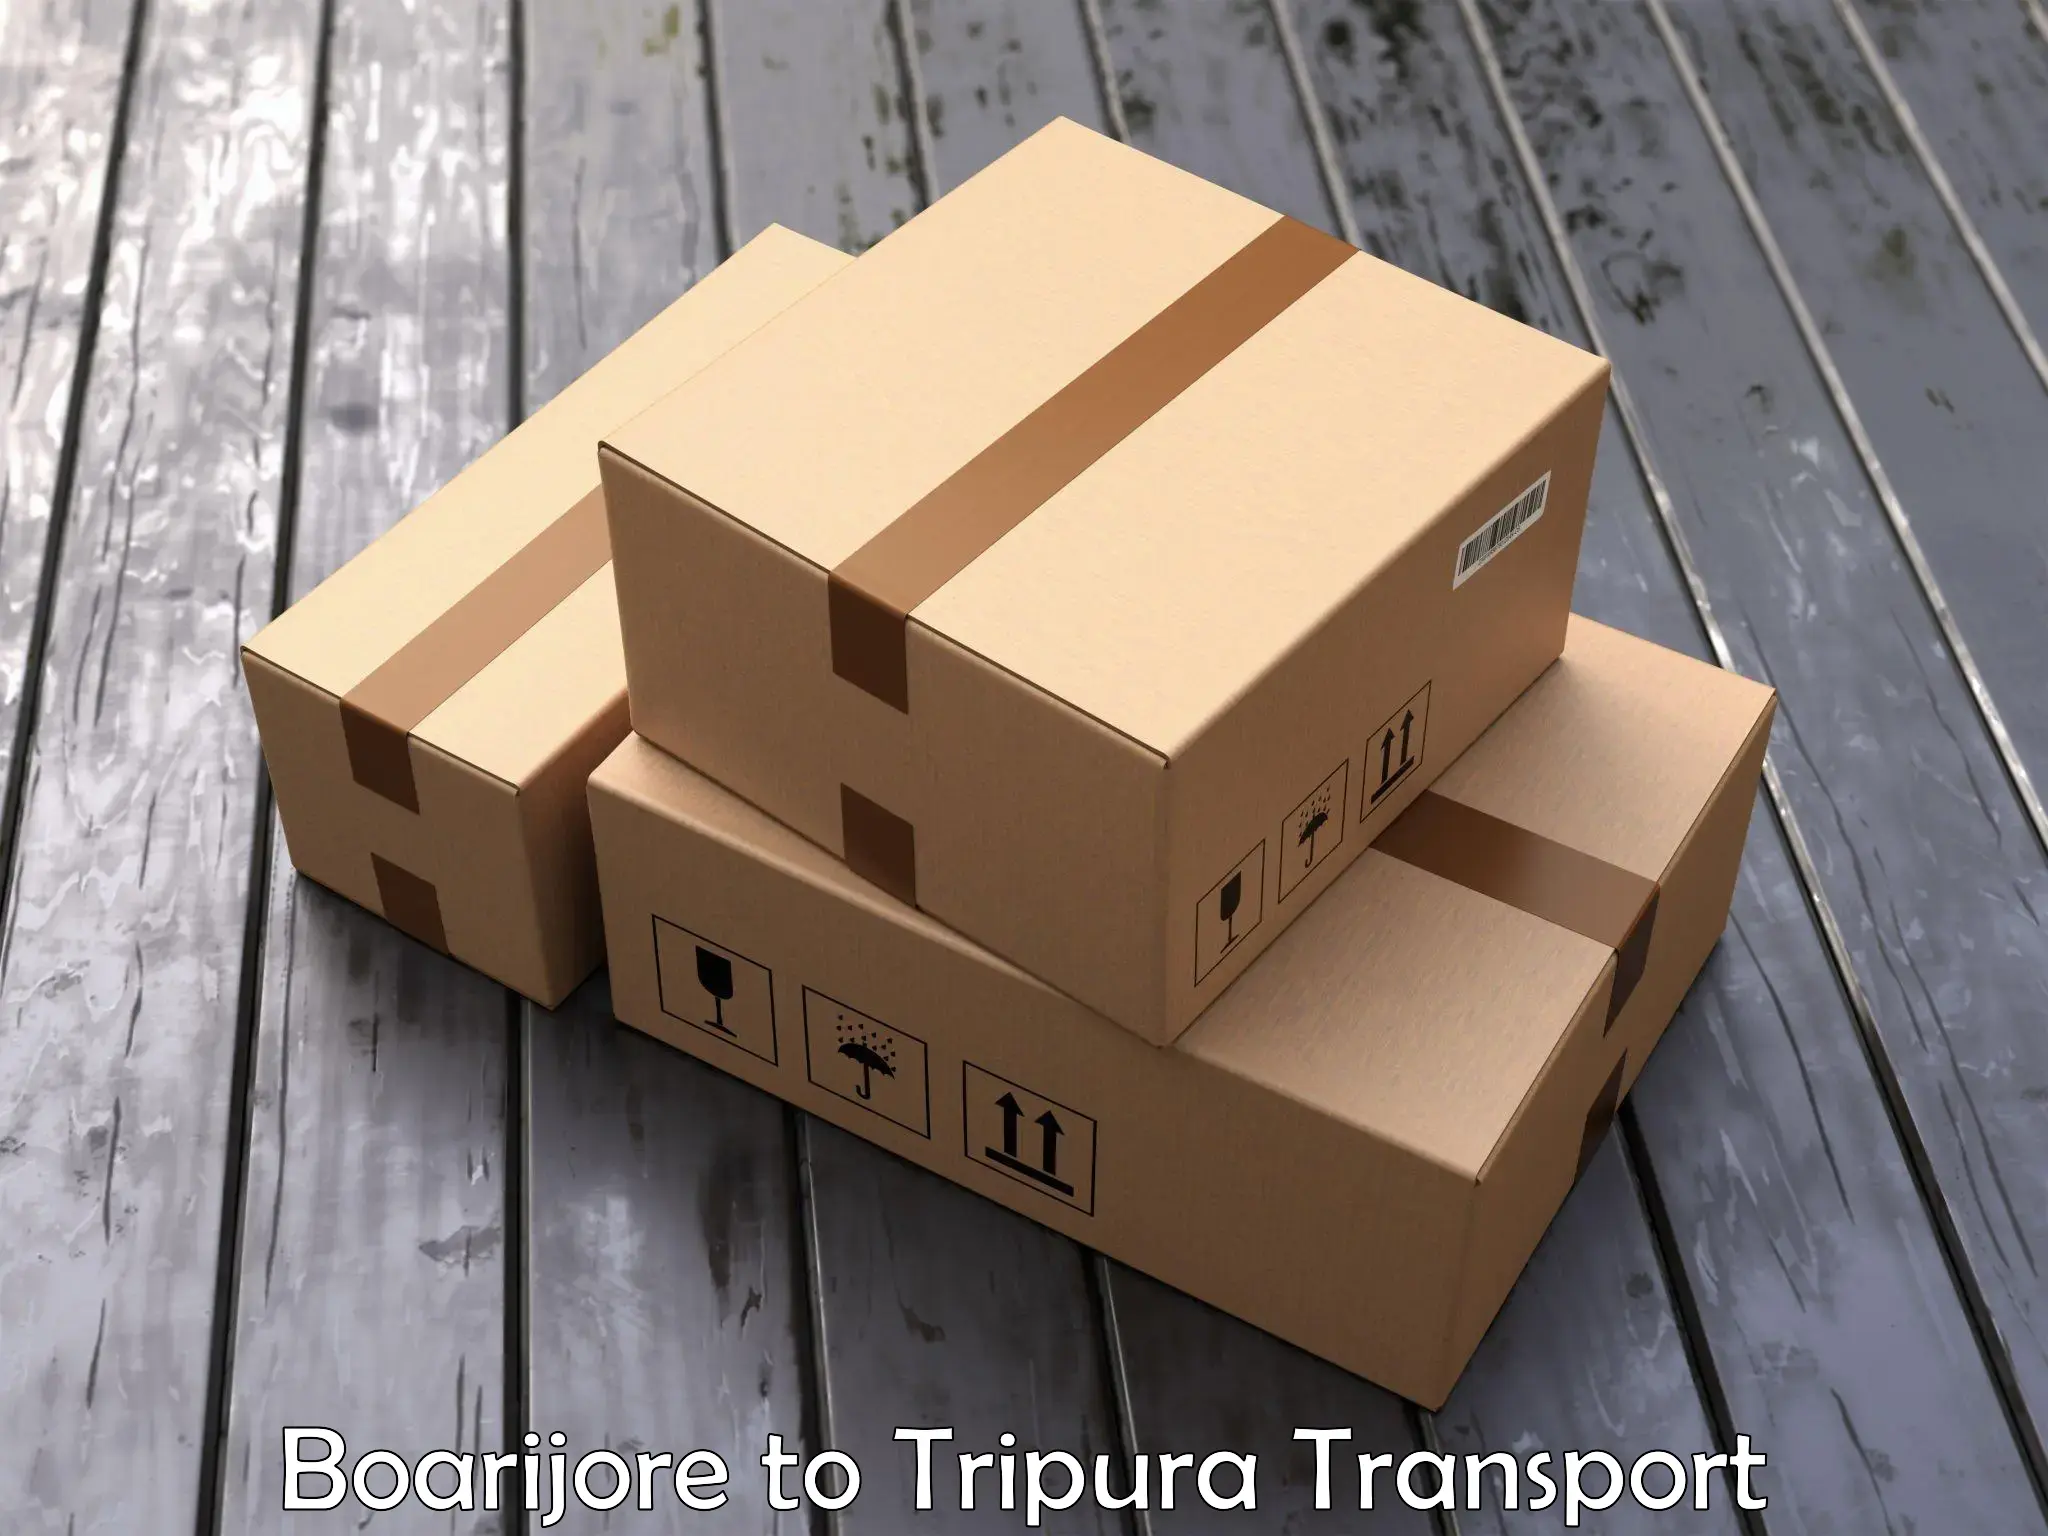 Luggage transport services Boarijore to Udaipur Tripura